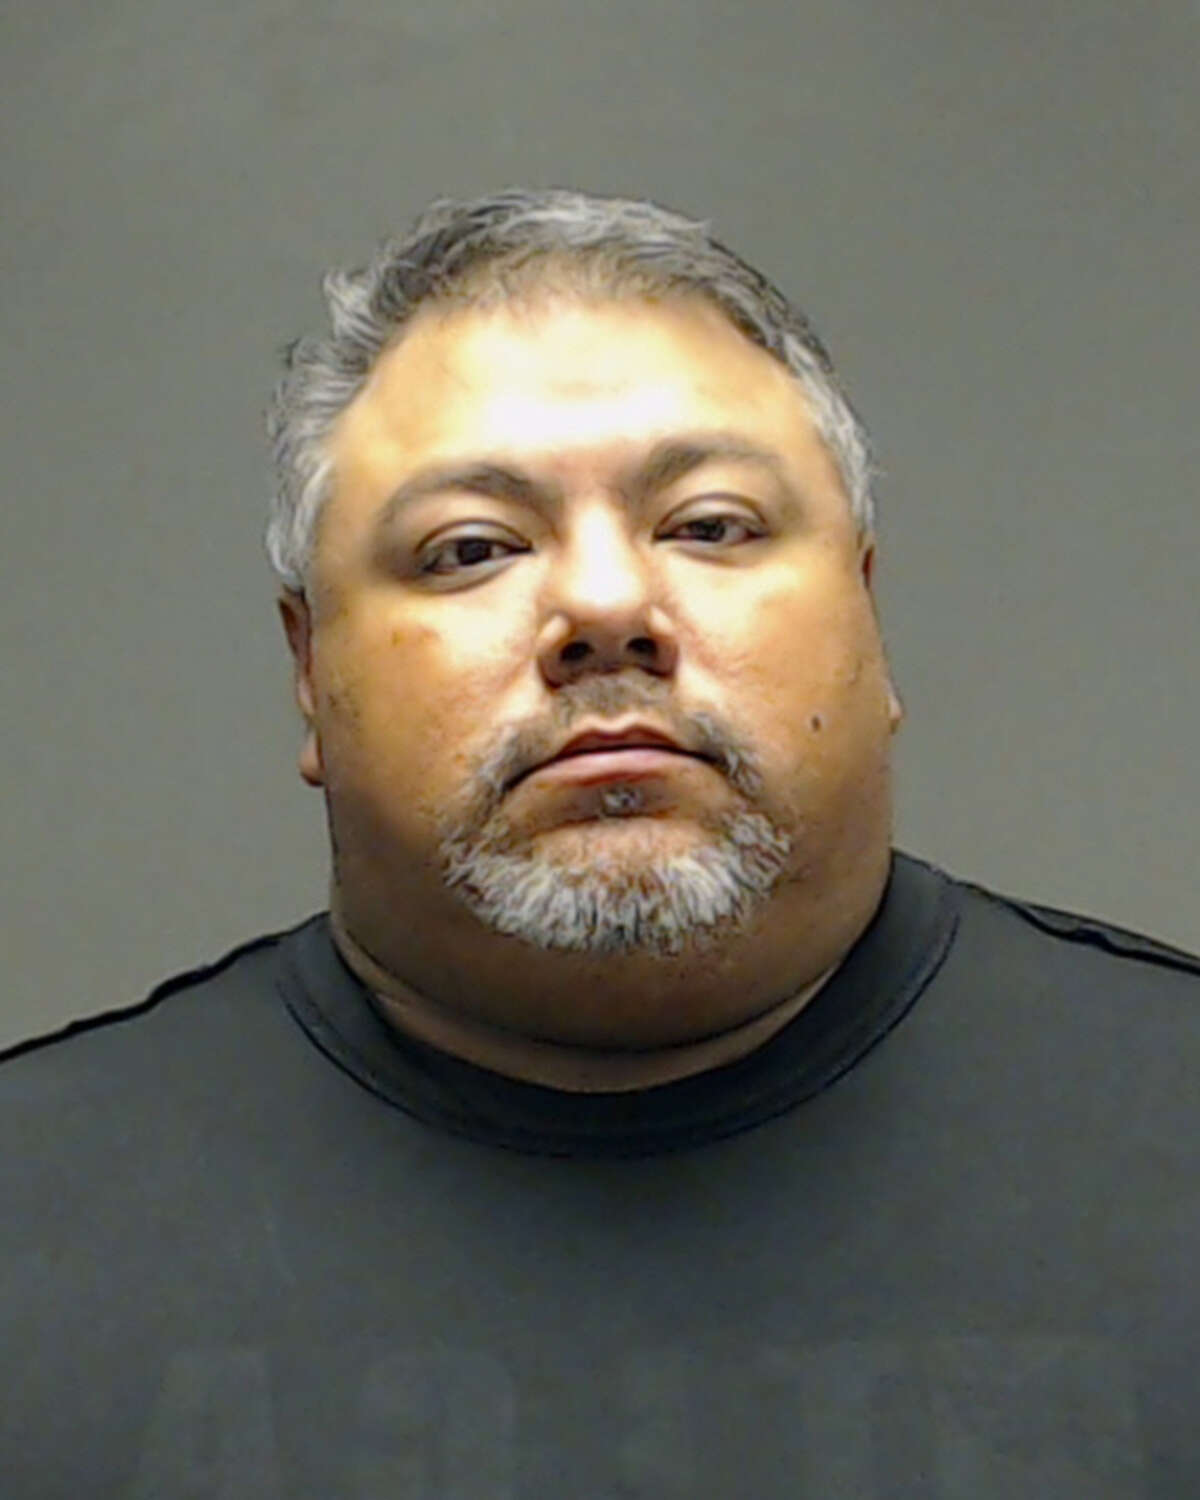 Justin Benedict Morales, 40, was arrested May 21 in Tom Green County as part of a nationwide sting operation against child predators, according to the Texas Attorney General's Office.